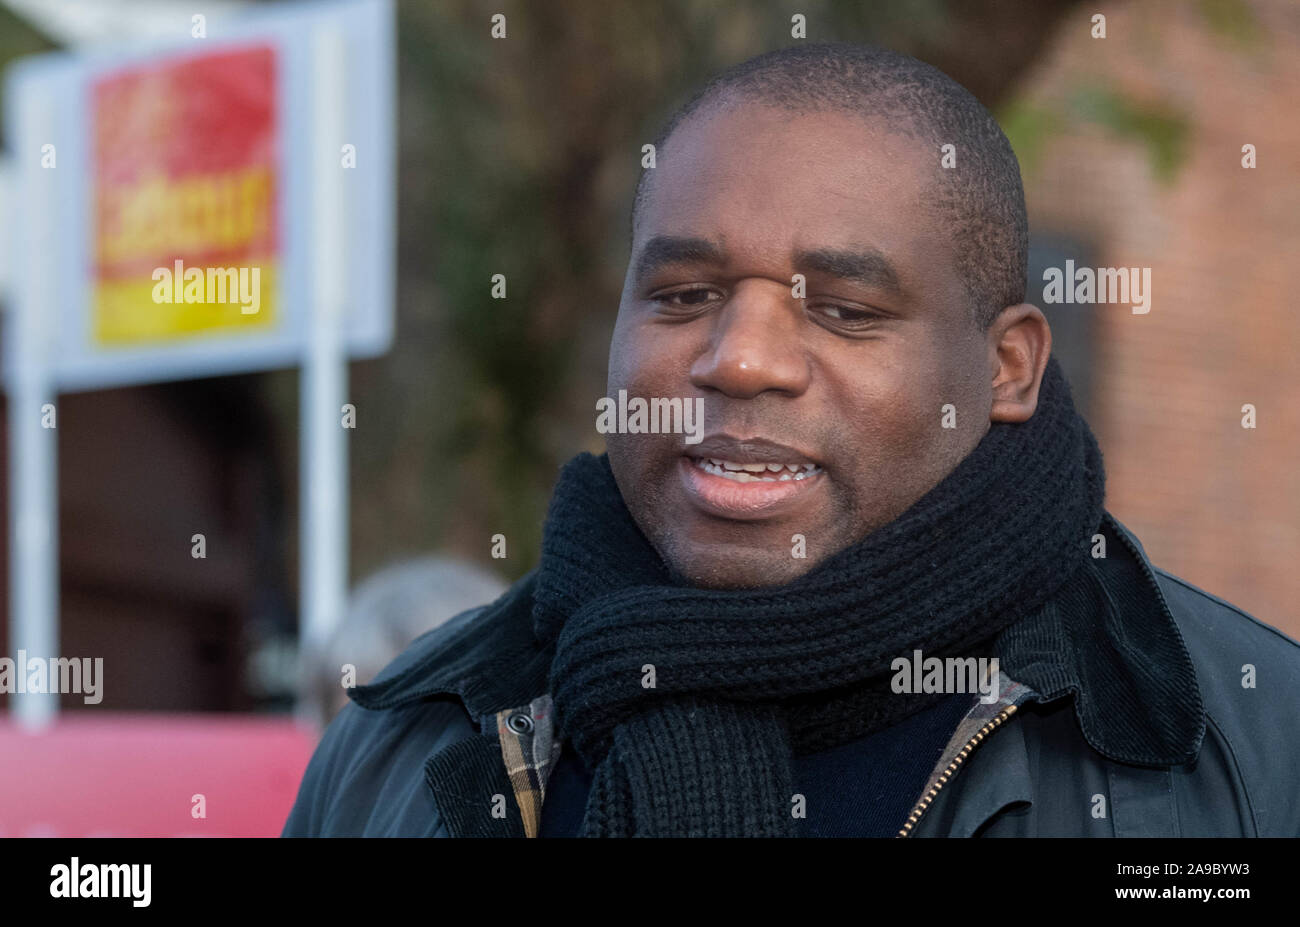 Brentwood Essex, UK. 14th Nov, 2019. General Election David Lammy, (pictured) labour candidate for Tottenham and controversal politician campaigning in Brentwood Essex with Oliver Durose, Labour parliamentary candidate for Brentwood and Ongar in Brentwood High Street, Essex UK Credit: Ian Davidson/Alamy Live News Stock Photo